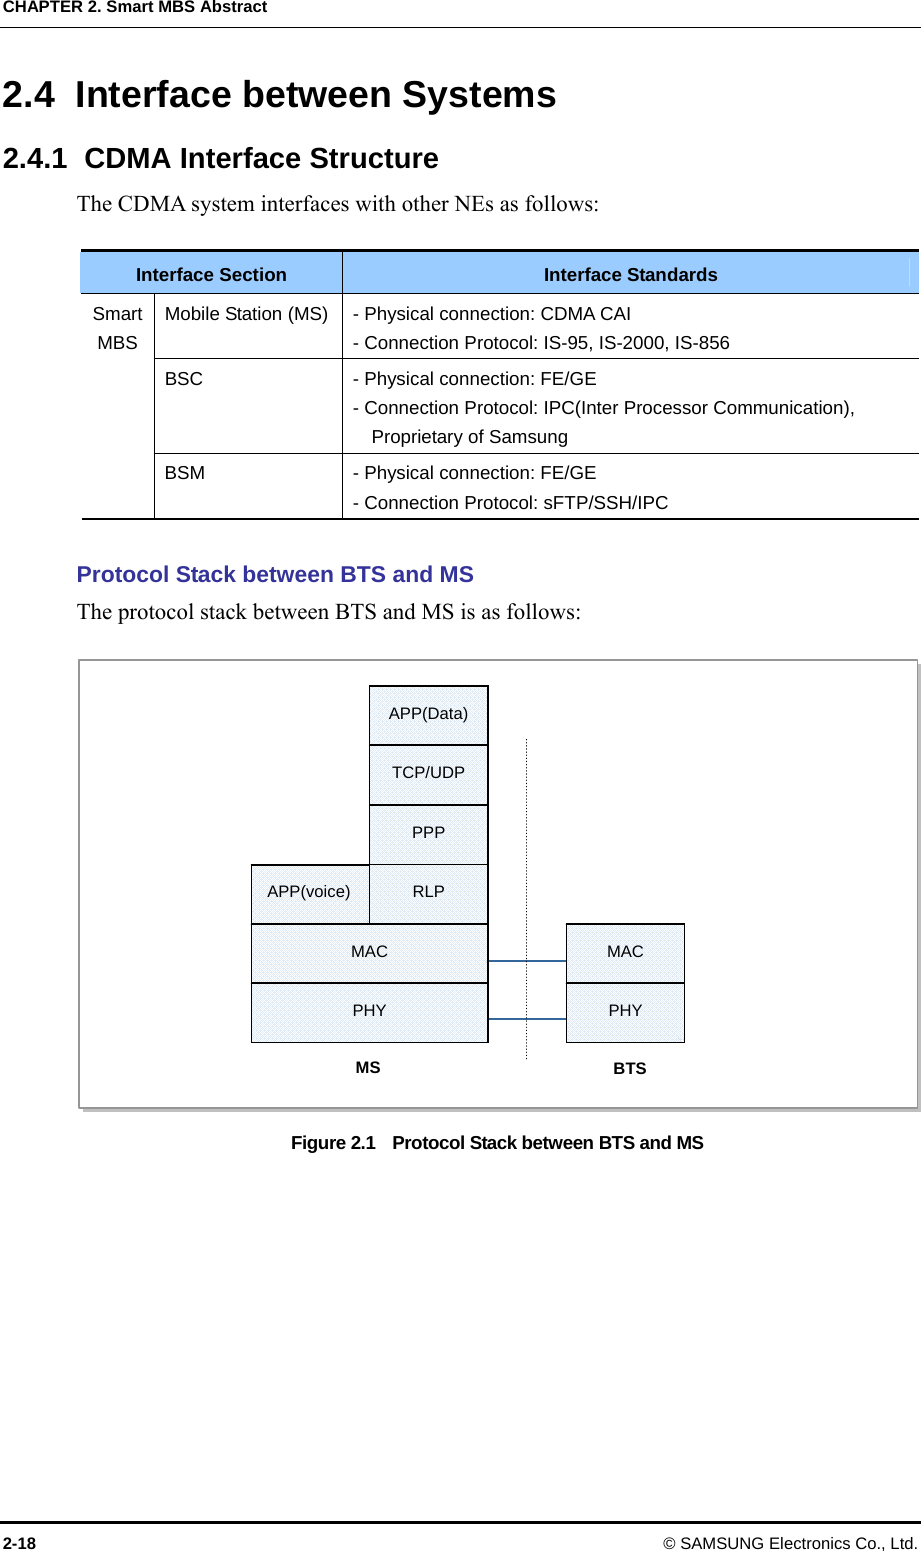 CHAPTER 2. Smart MBS Abstract 2-18 © SAMSUNG Electronics Co., Ltd. 2.4 Interface between Systems 2.4.1  CDMA Interface Structure The CDMA system interfaces with other NEs as follows:  Interface Section  Interface Standards Mobile Station (MS)  - Physical connection: CDMA CAI - Connection Protocol: IS-95, IS-2000, IS-856 BSC  - Physical connection: FE/GE - Connection Protocol: IPC(Inter Processor Communication), Proprietary of Samsung Smart MBS BSM  - Physical connection: FE/GE - Connection Protocol: sFTP/SSH/IPC  Protocol Stack between BTS and MS The protocol stack between BTS and MS is as follows:  Figure 2.1    Protocol Stack between BTS and MS  MS  BTS PHY MAC APP(voice)  RLP TCP/UDP PHY MAC PPP APP(Data) 